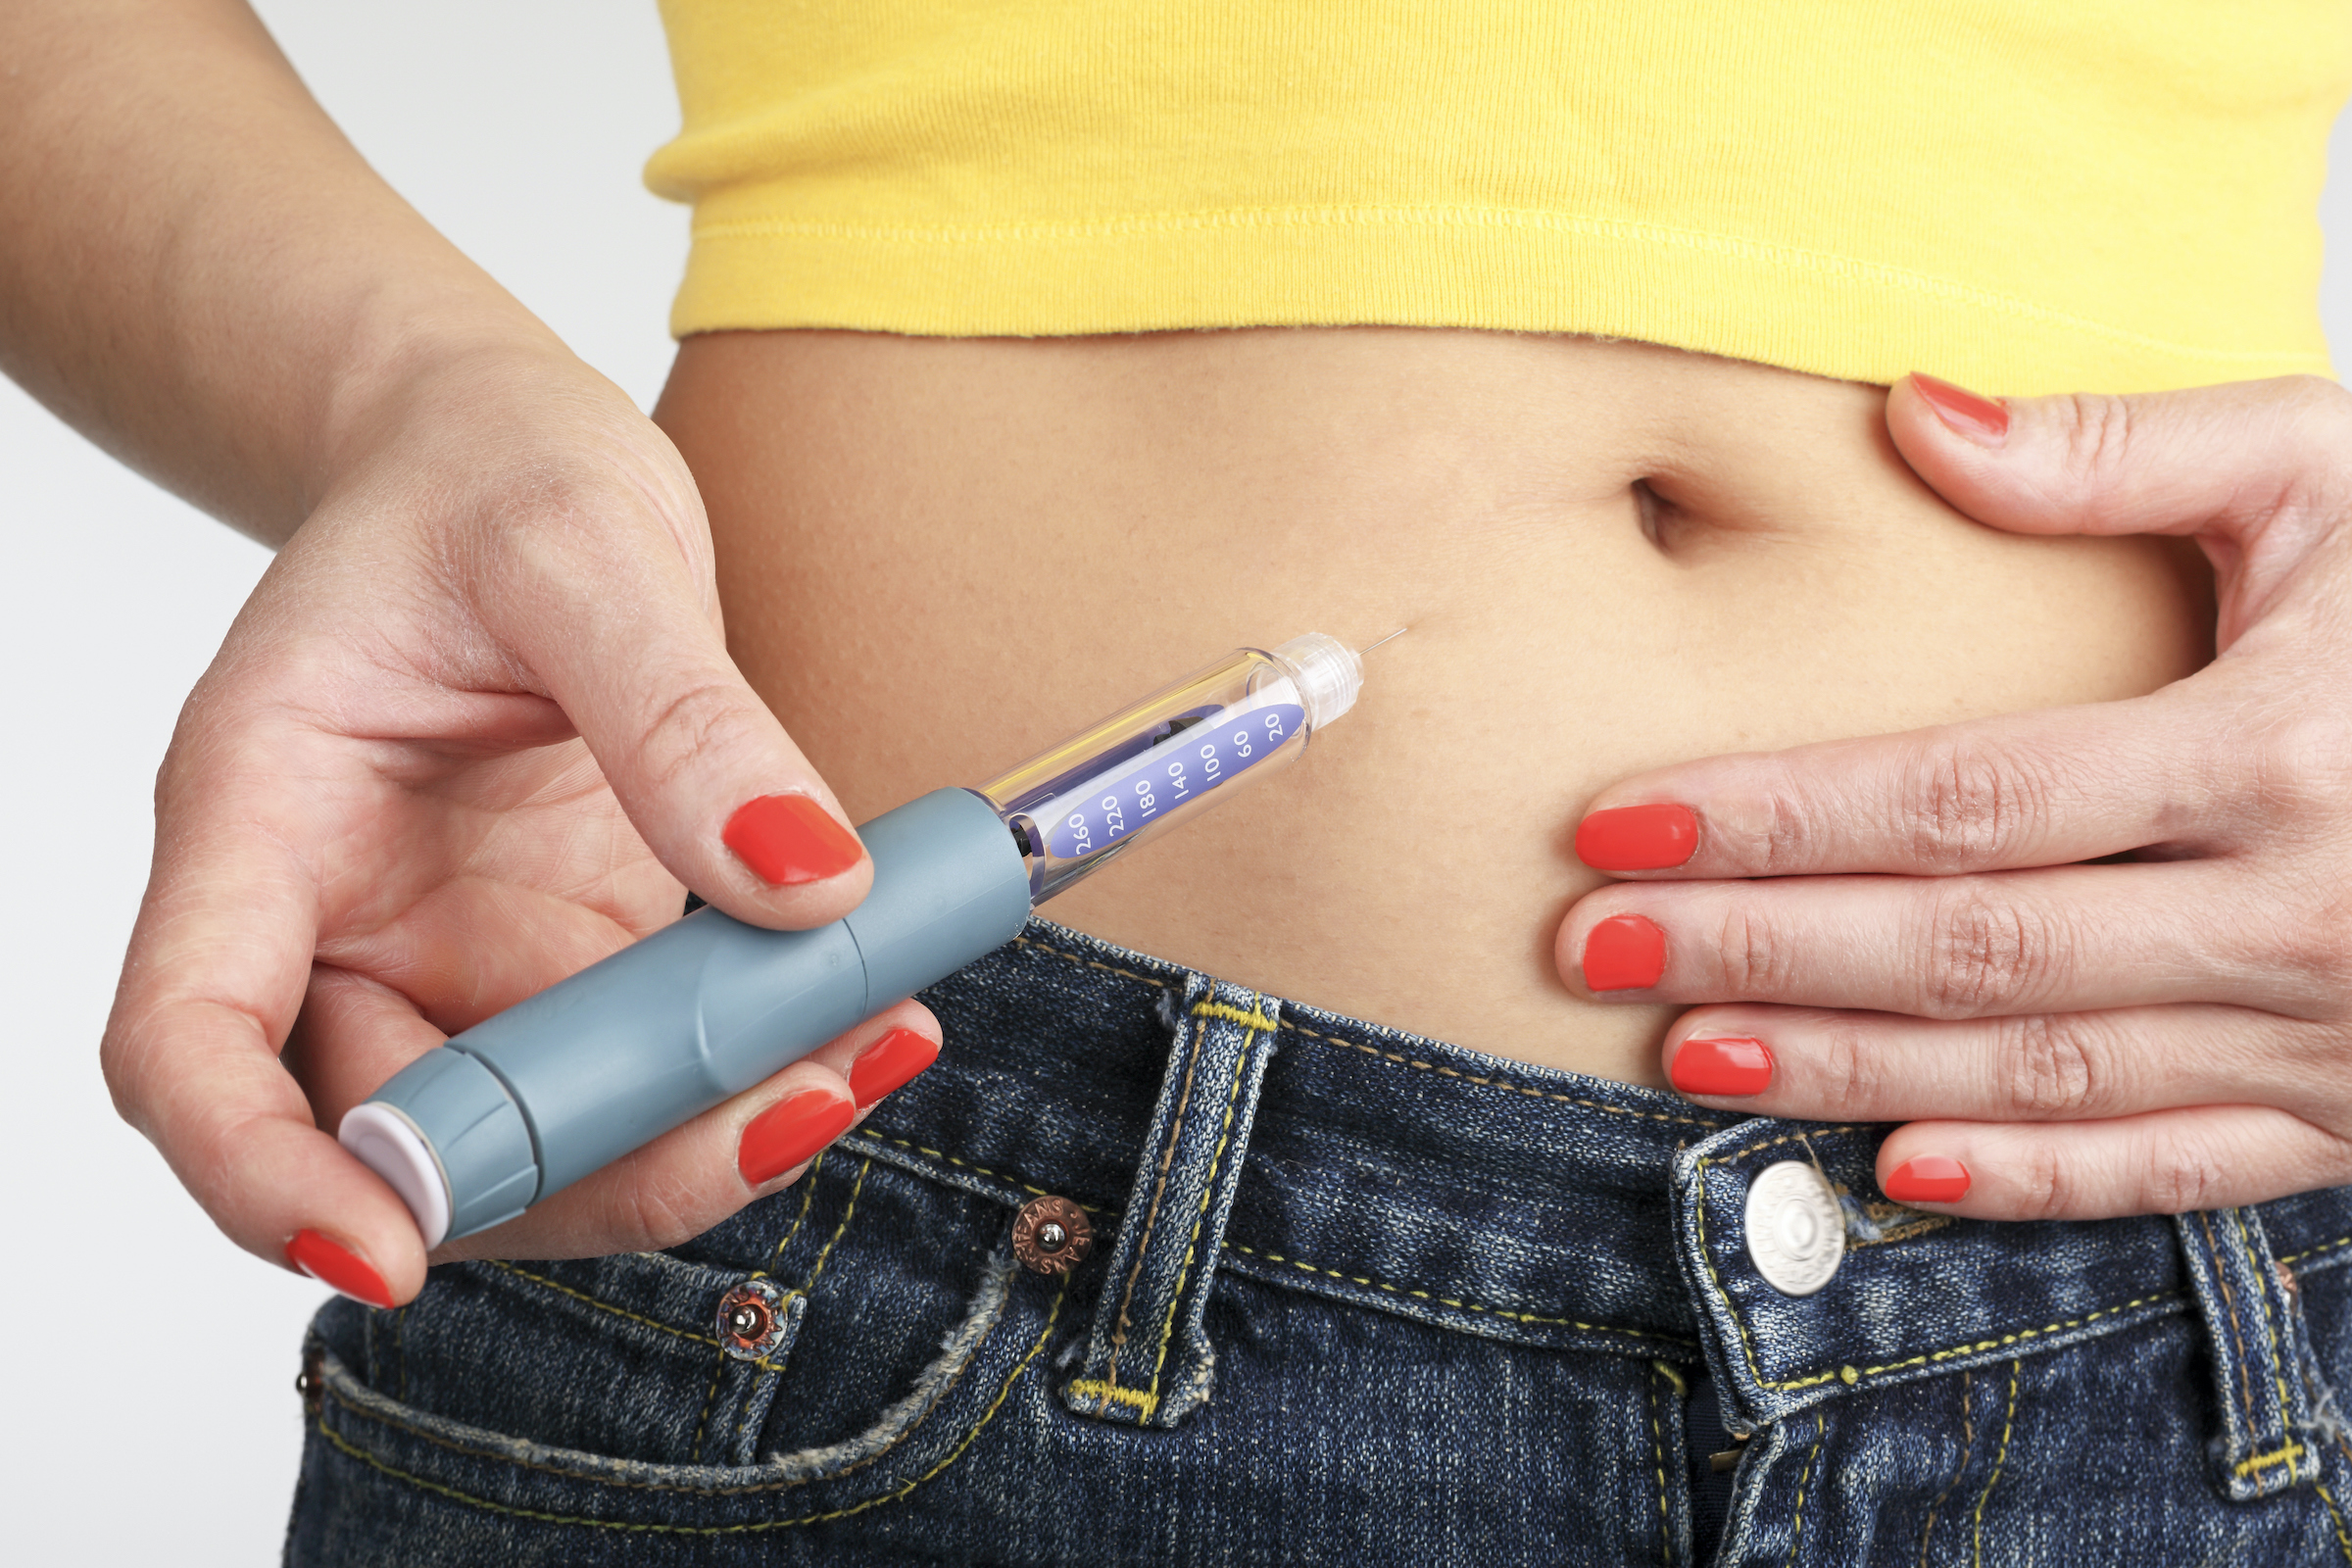 What Should You Know About Insulin?